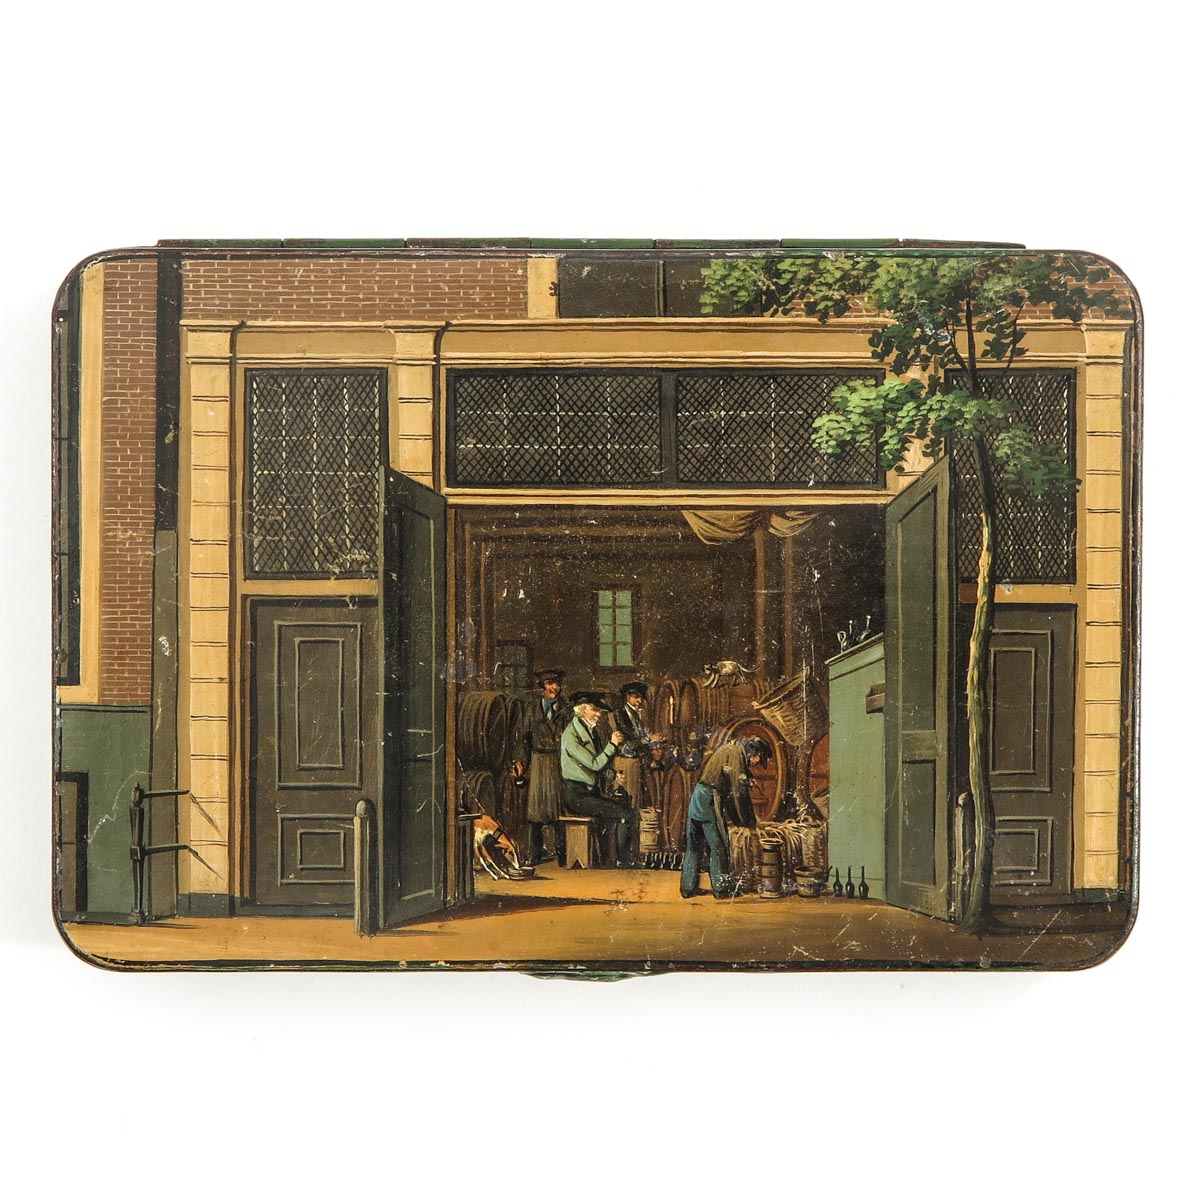 A 19th Century Painted Tin Tobacco Box - Image 6 of 9